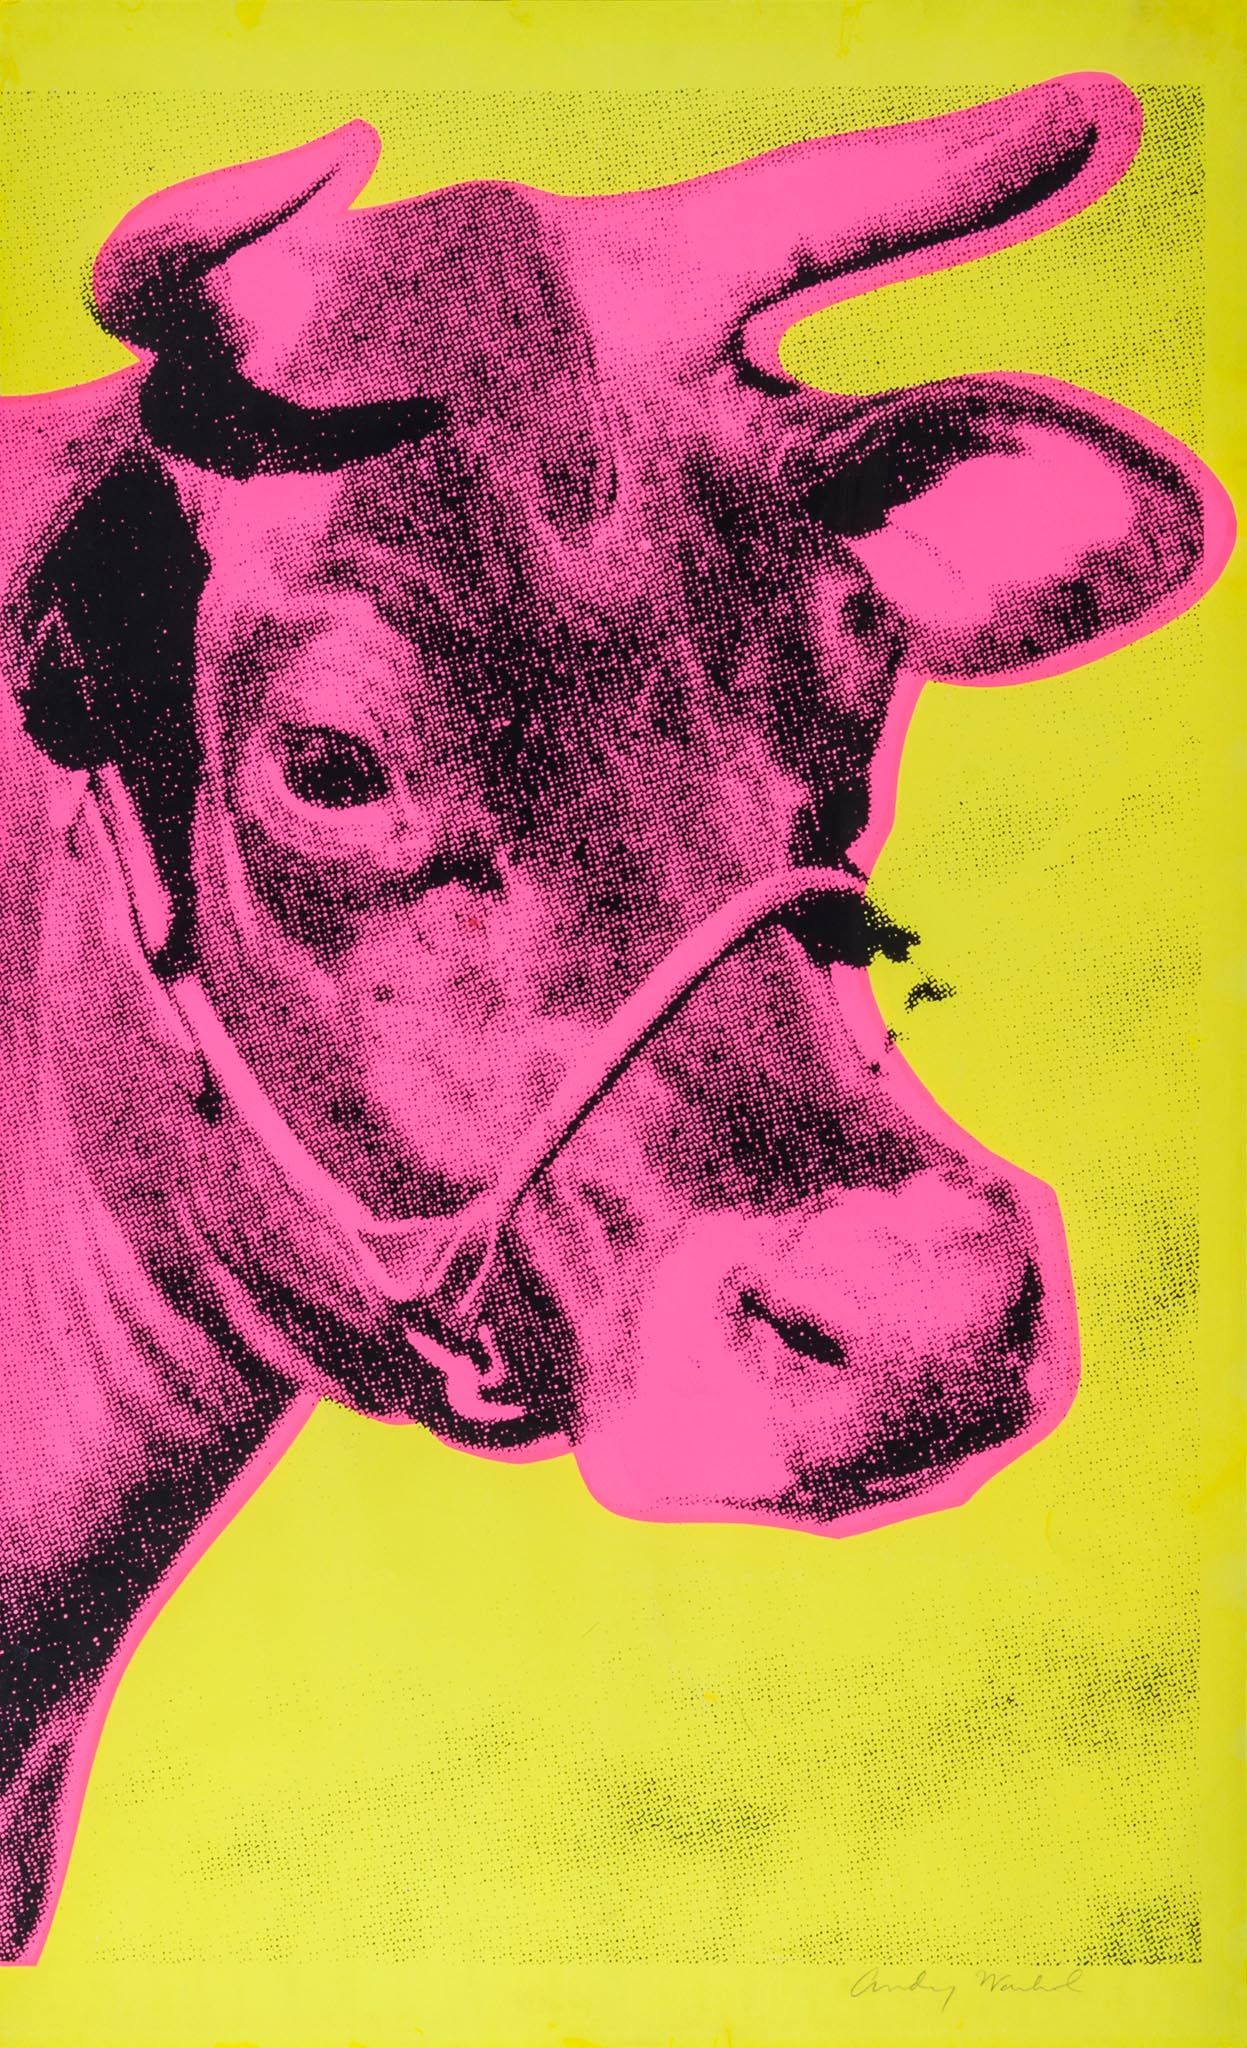 Andy Warhol | Cow | 11 | 1966 | Image of Artists' work.